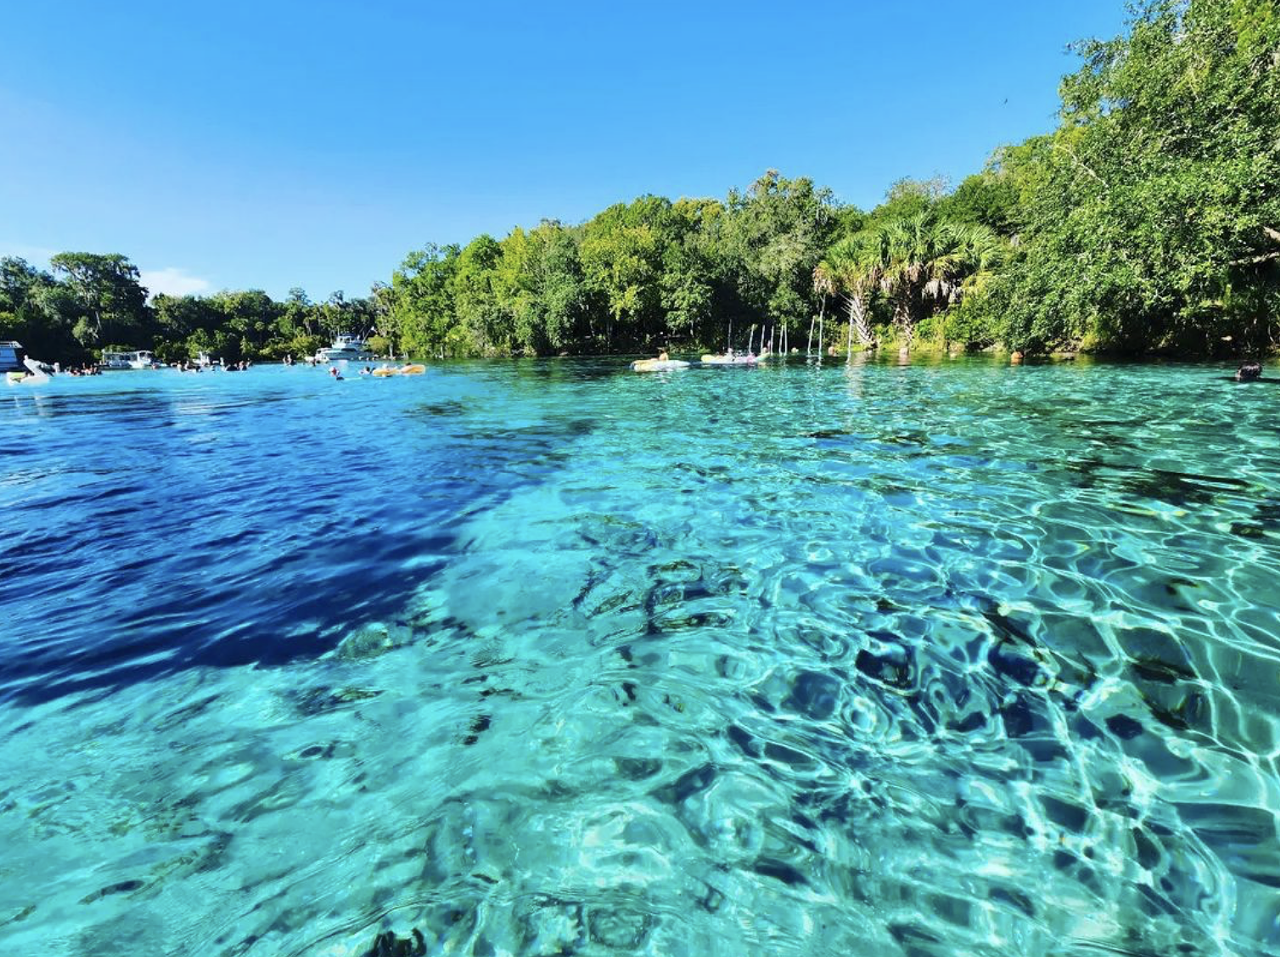 The best springs and beaches within driving distance of Orlando